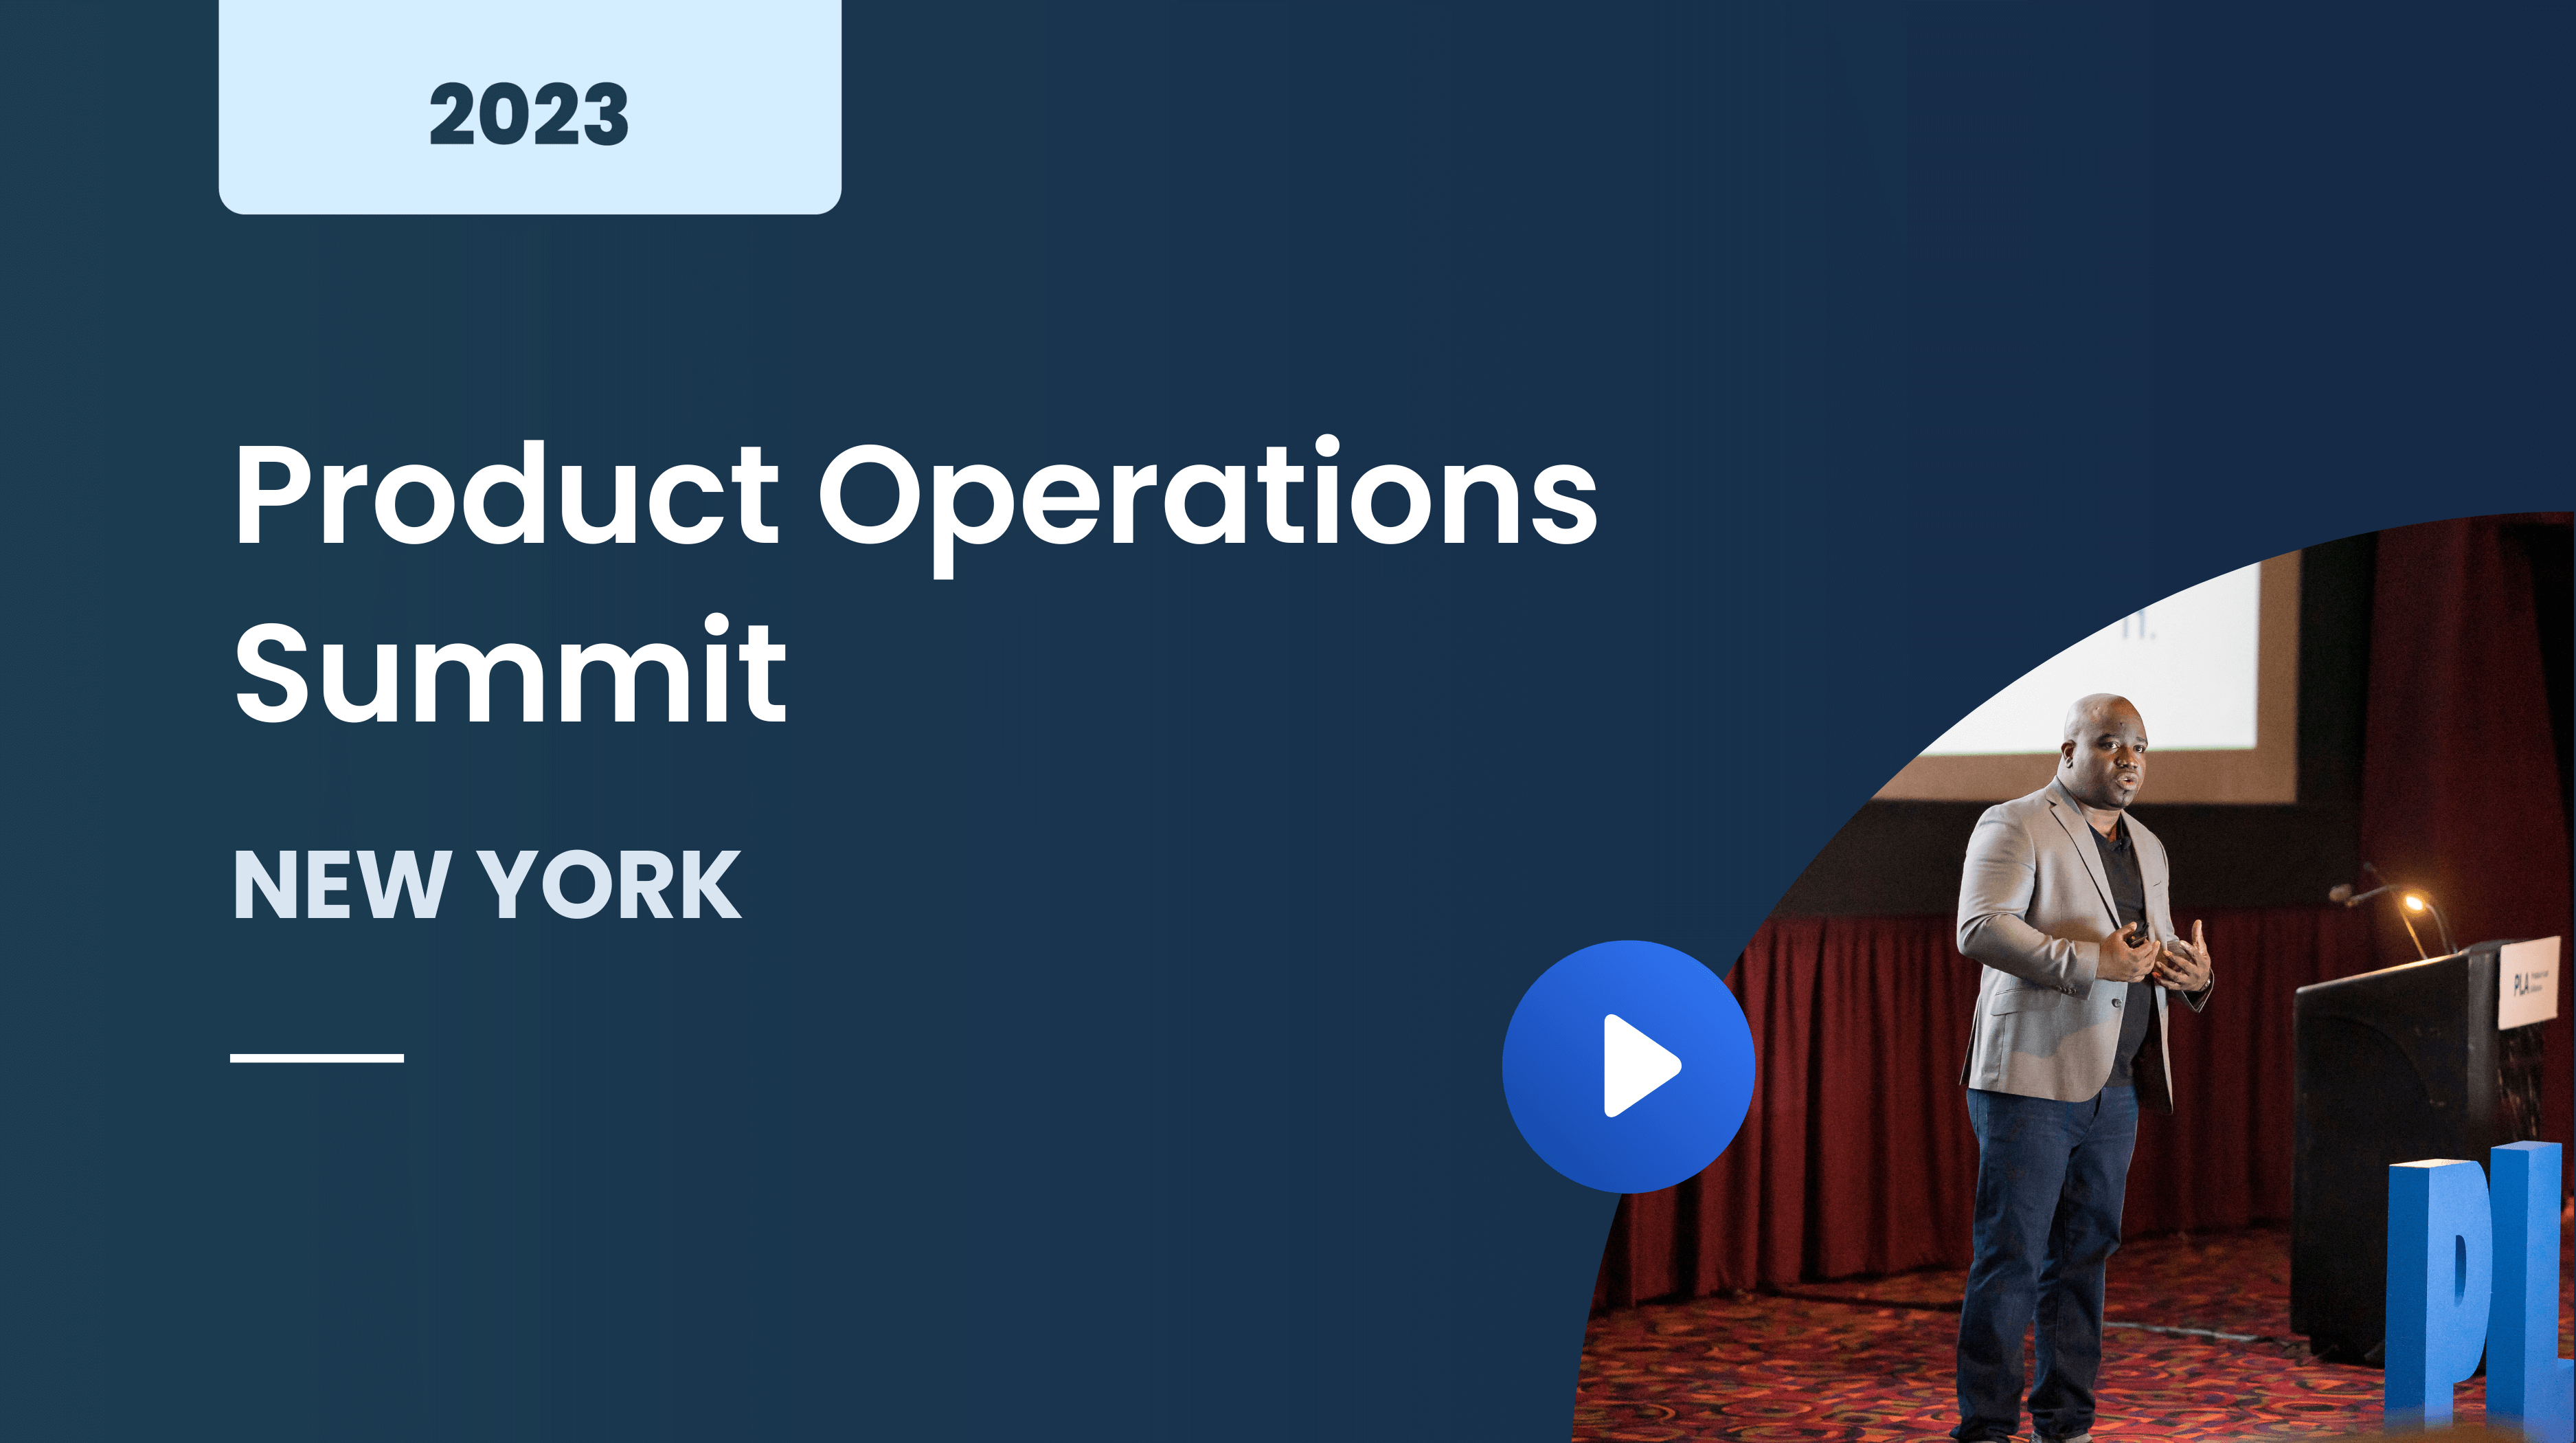 Product Operations Summit New York 2023